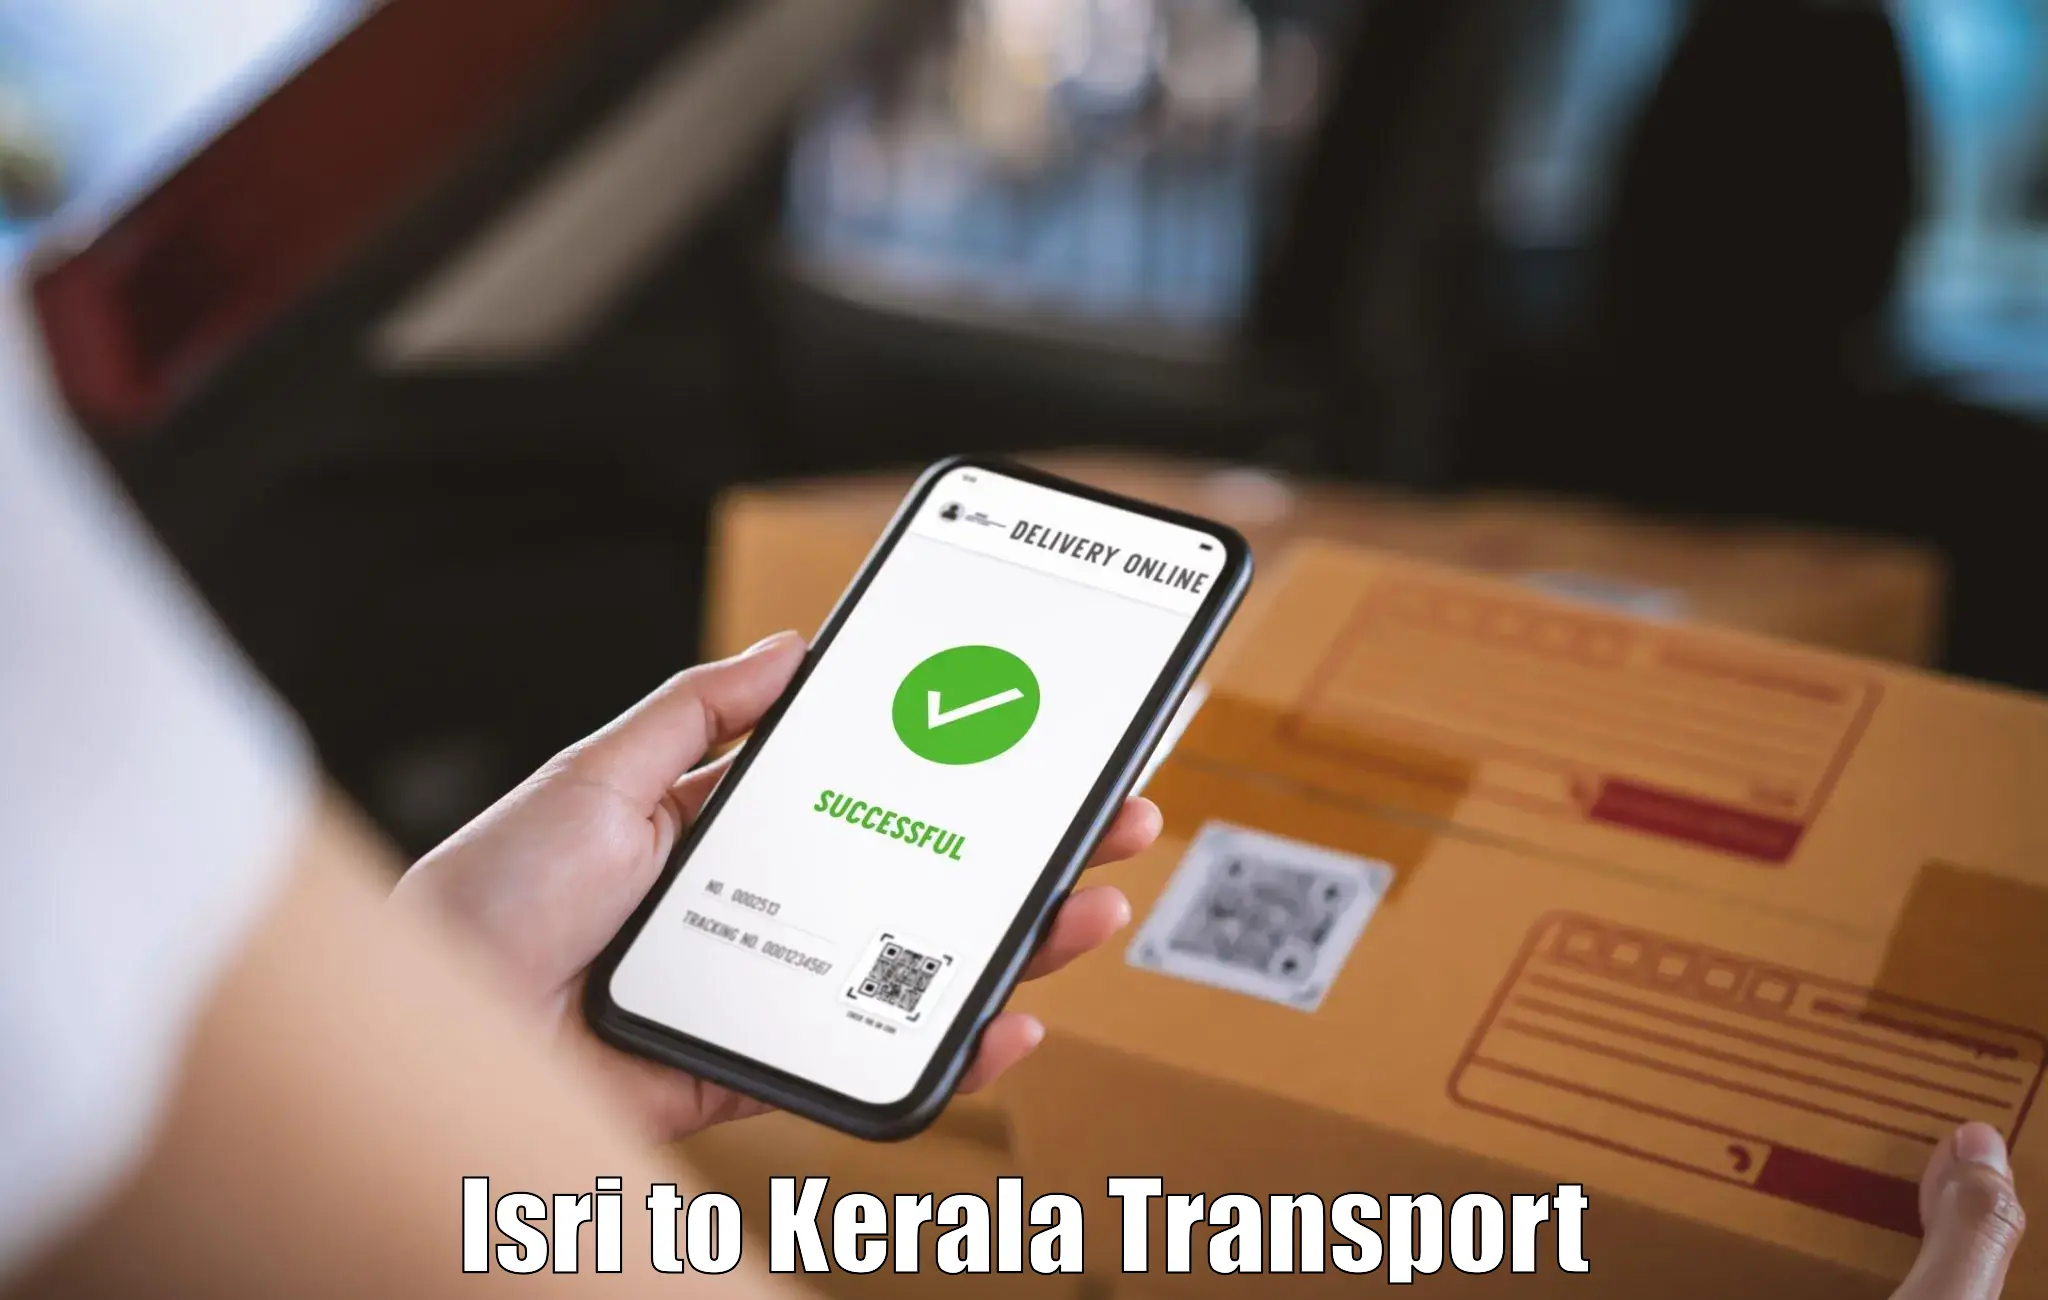 Package delivery services Isri to Kalpetta